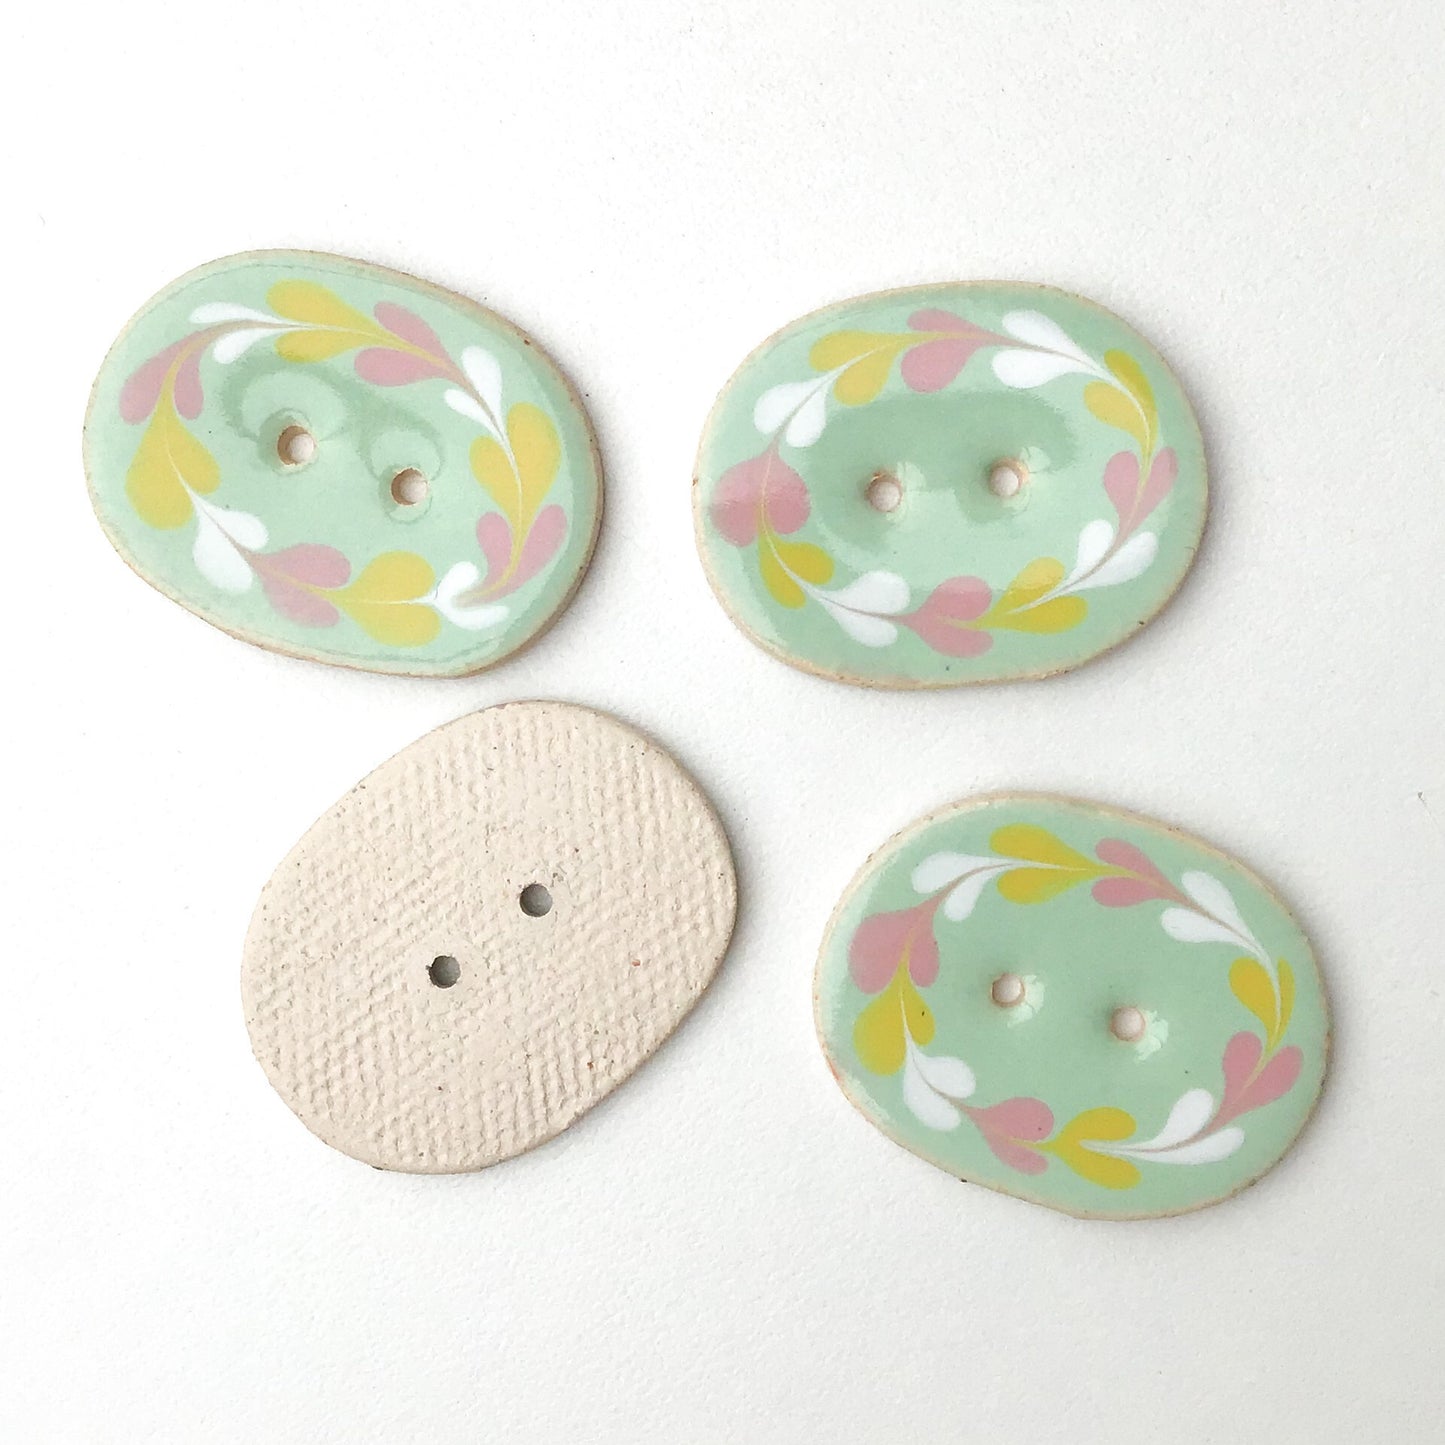 Decorative Ceramic Button with Floral Print Border - Aqua - Mint Green - Blue Clay Buttons - 1" x 1 1/4"